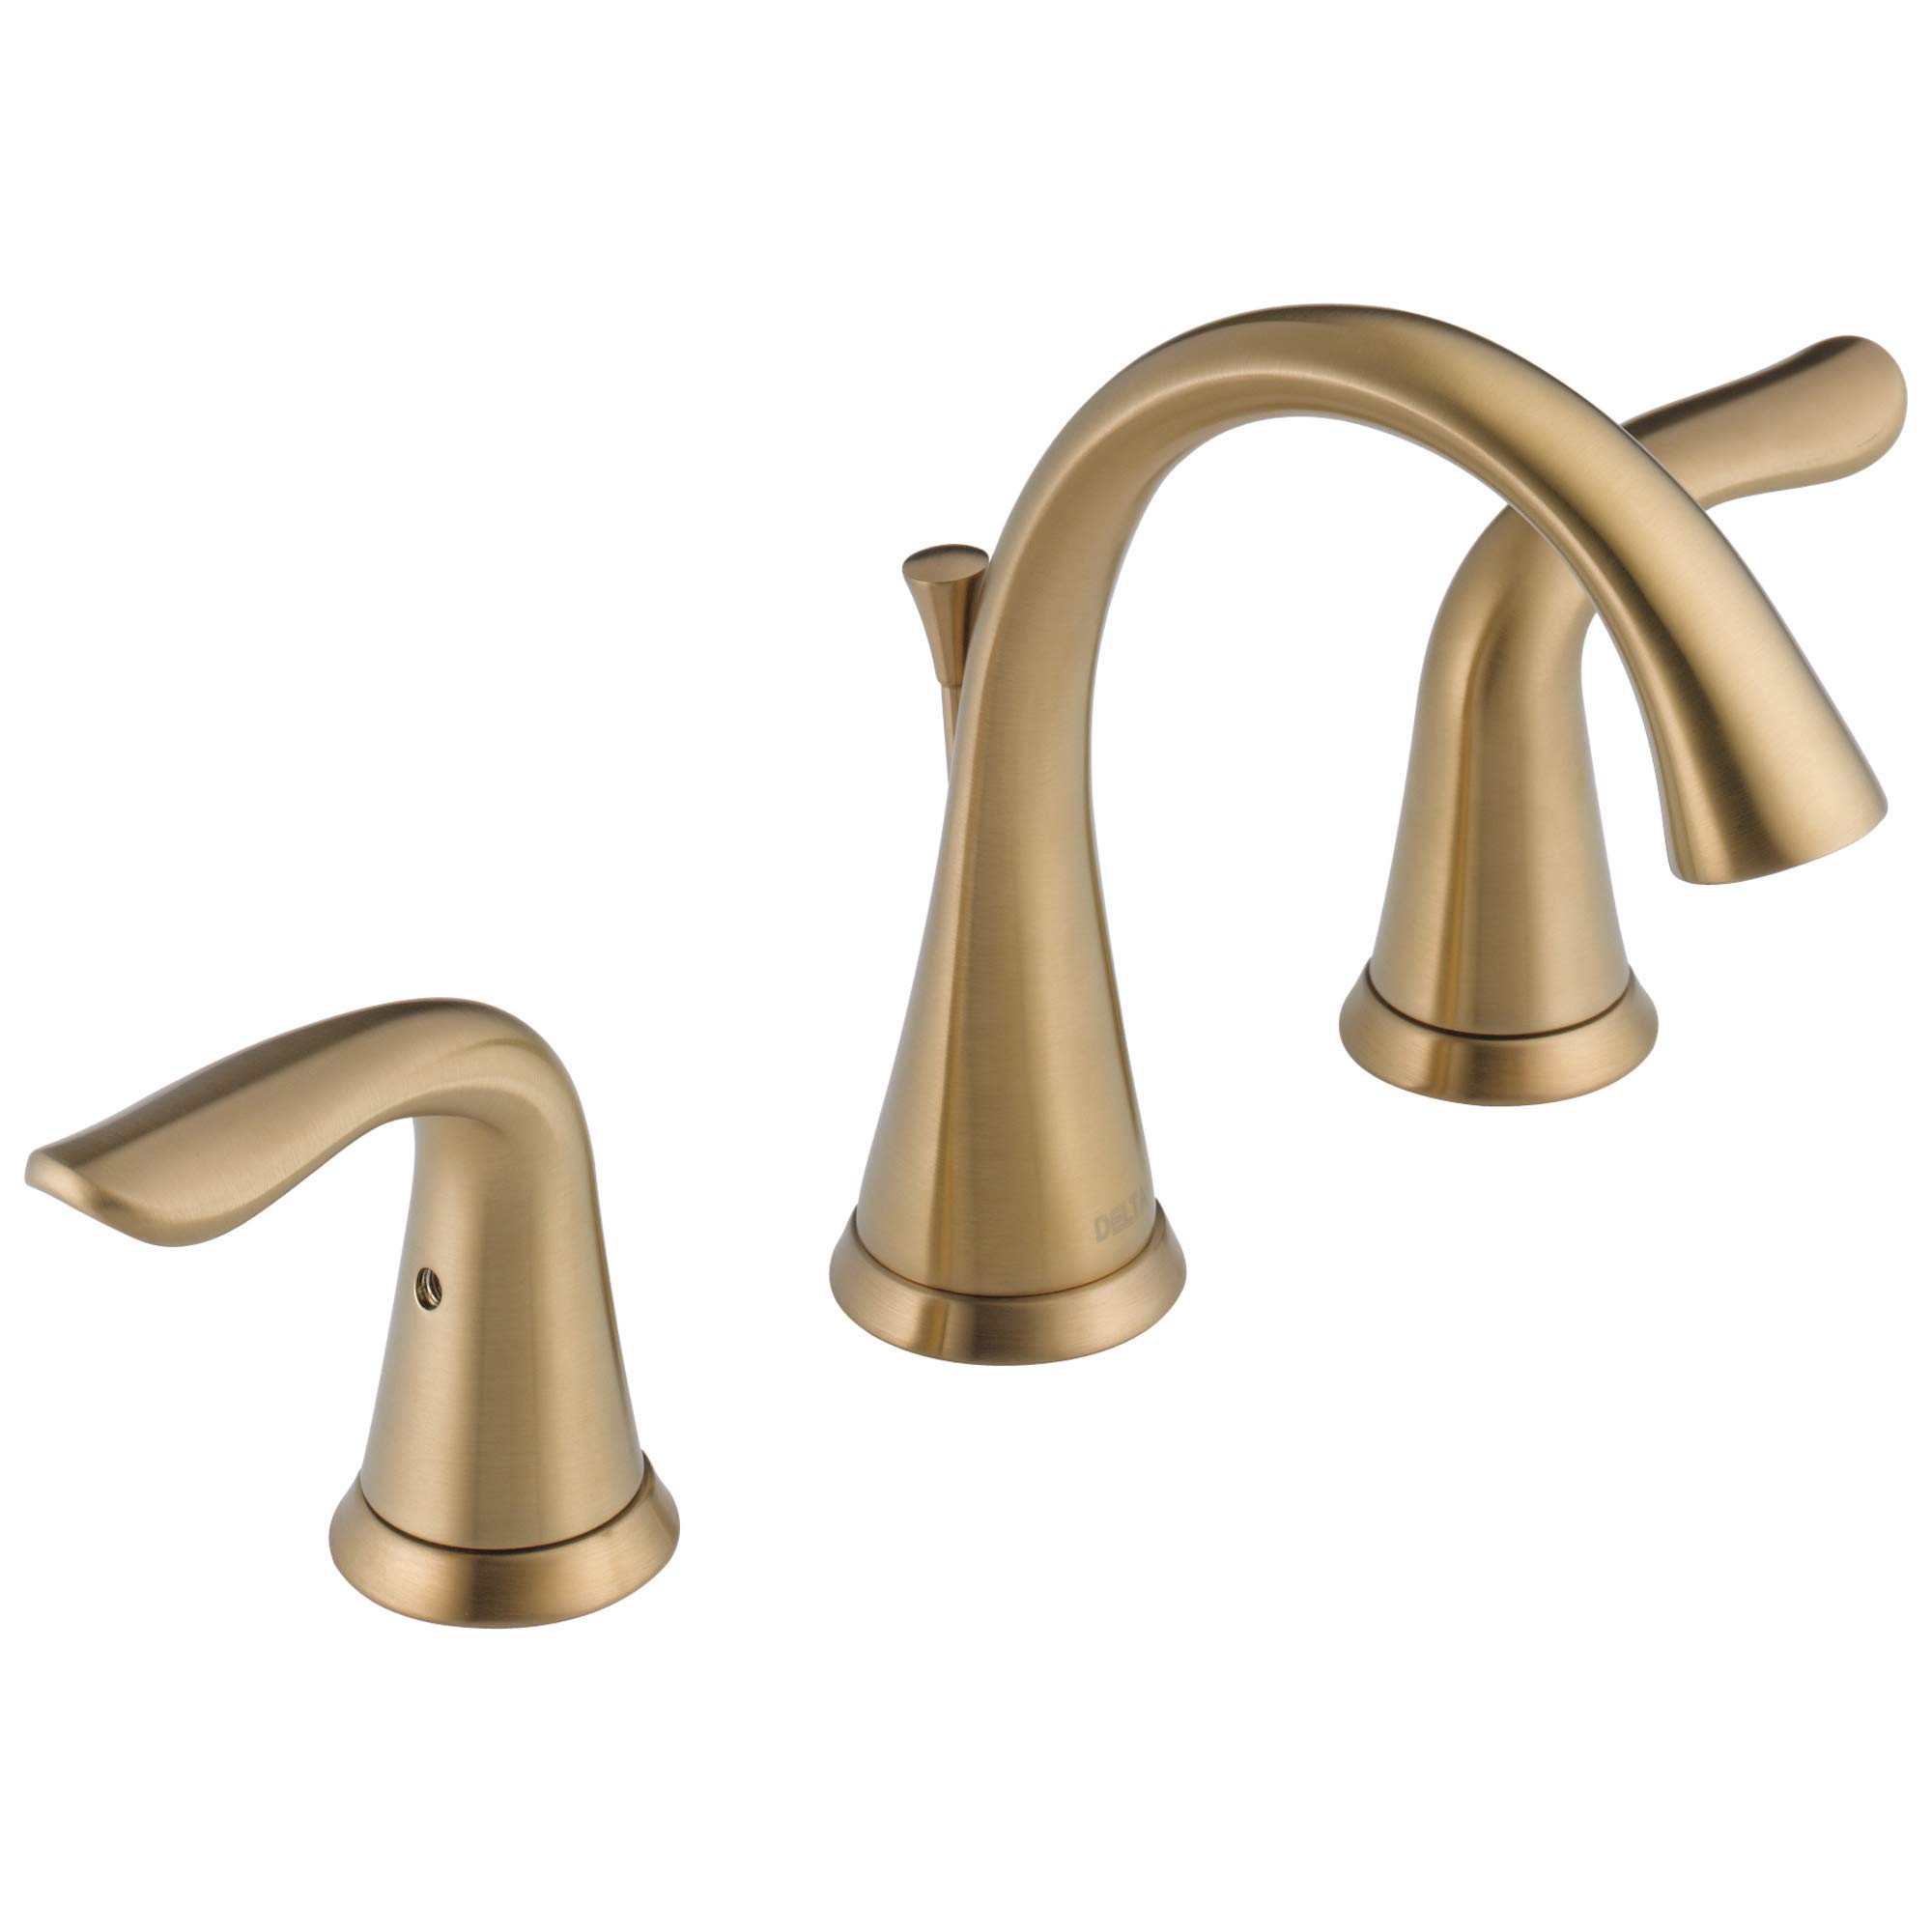 Delta Faucet Lahara Widespread Bathroom Faucet 3 Hole, Gold Bathroom Faucet, Diamond Seal Technology, Metal Drain Assembly, Champagne Bronze 3538-CZMPU-DST